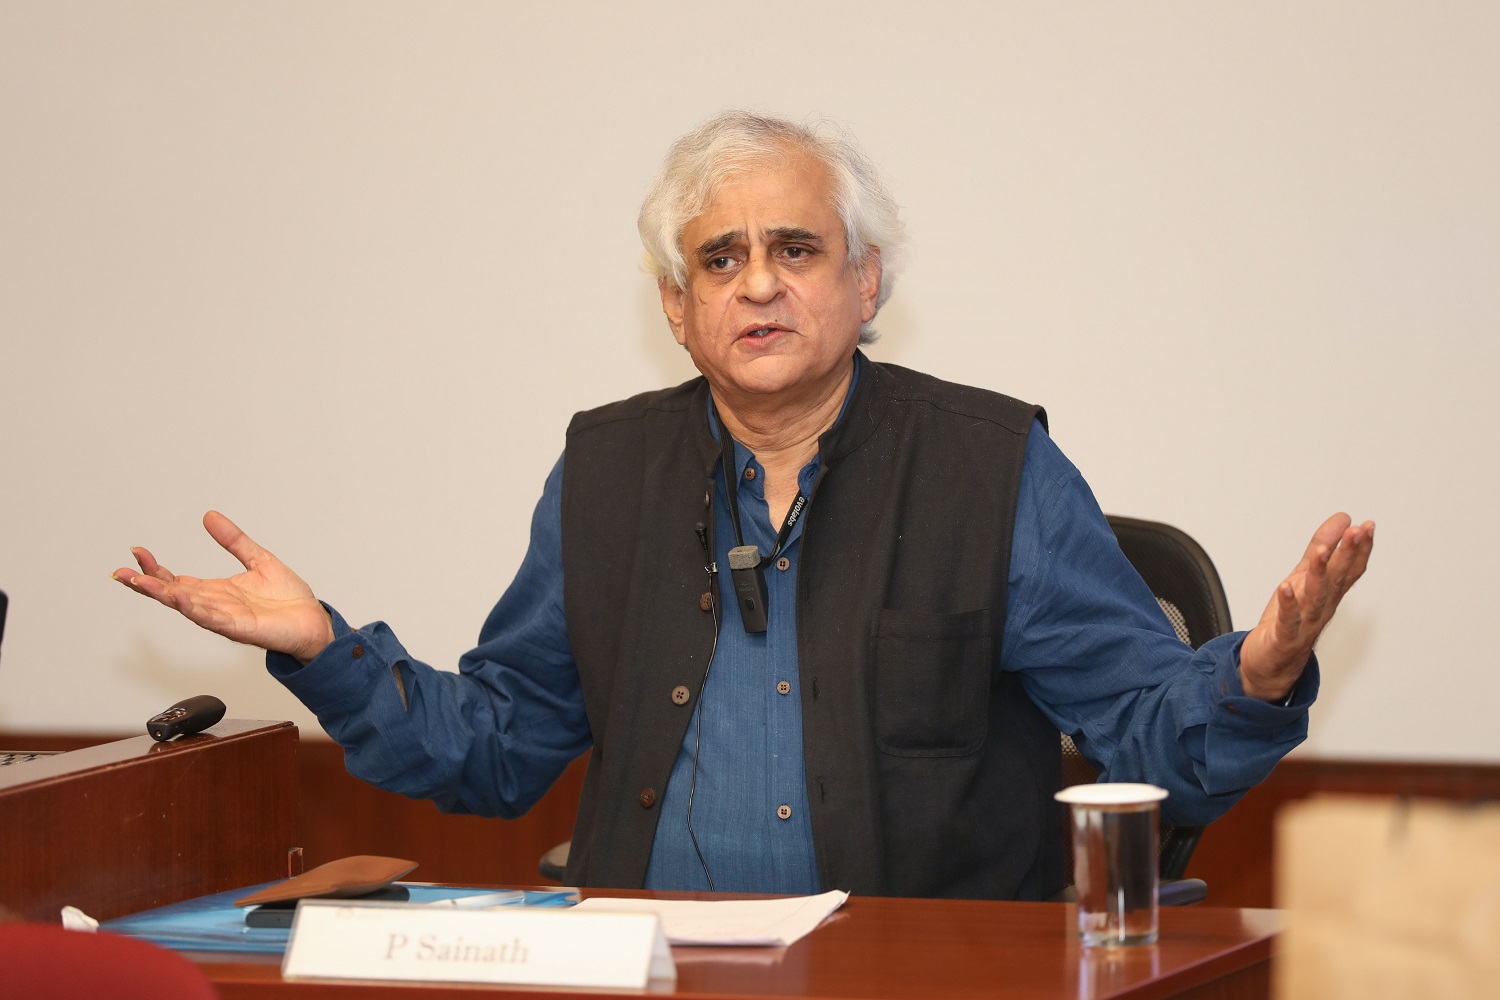 The Centre for Public Policy and students of the Executive Post Graduate Programme at IIM Bangalore hosted a talk on ‘Who were our freedom fighters’, by Magsaysay award winner P Sainath, on 21st July 2023.